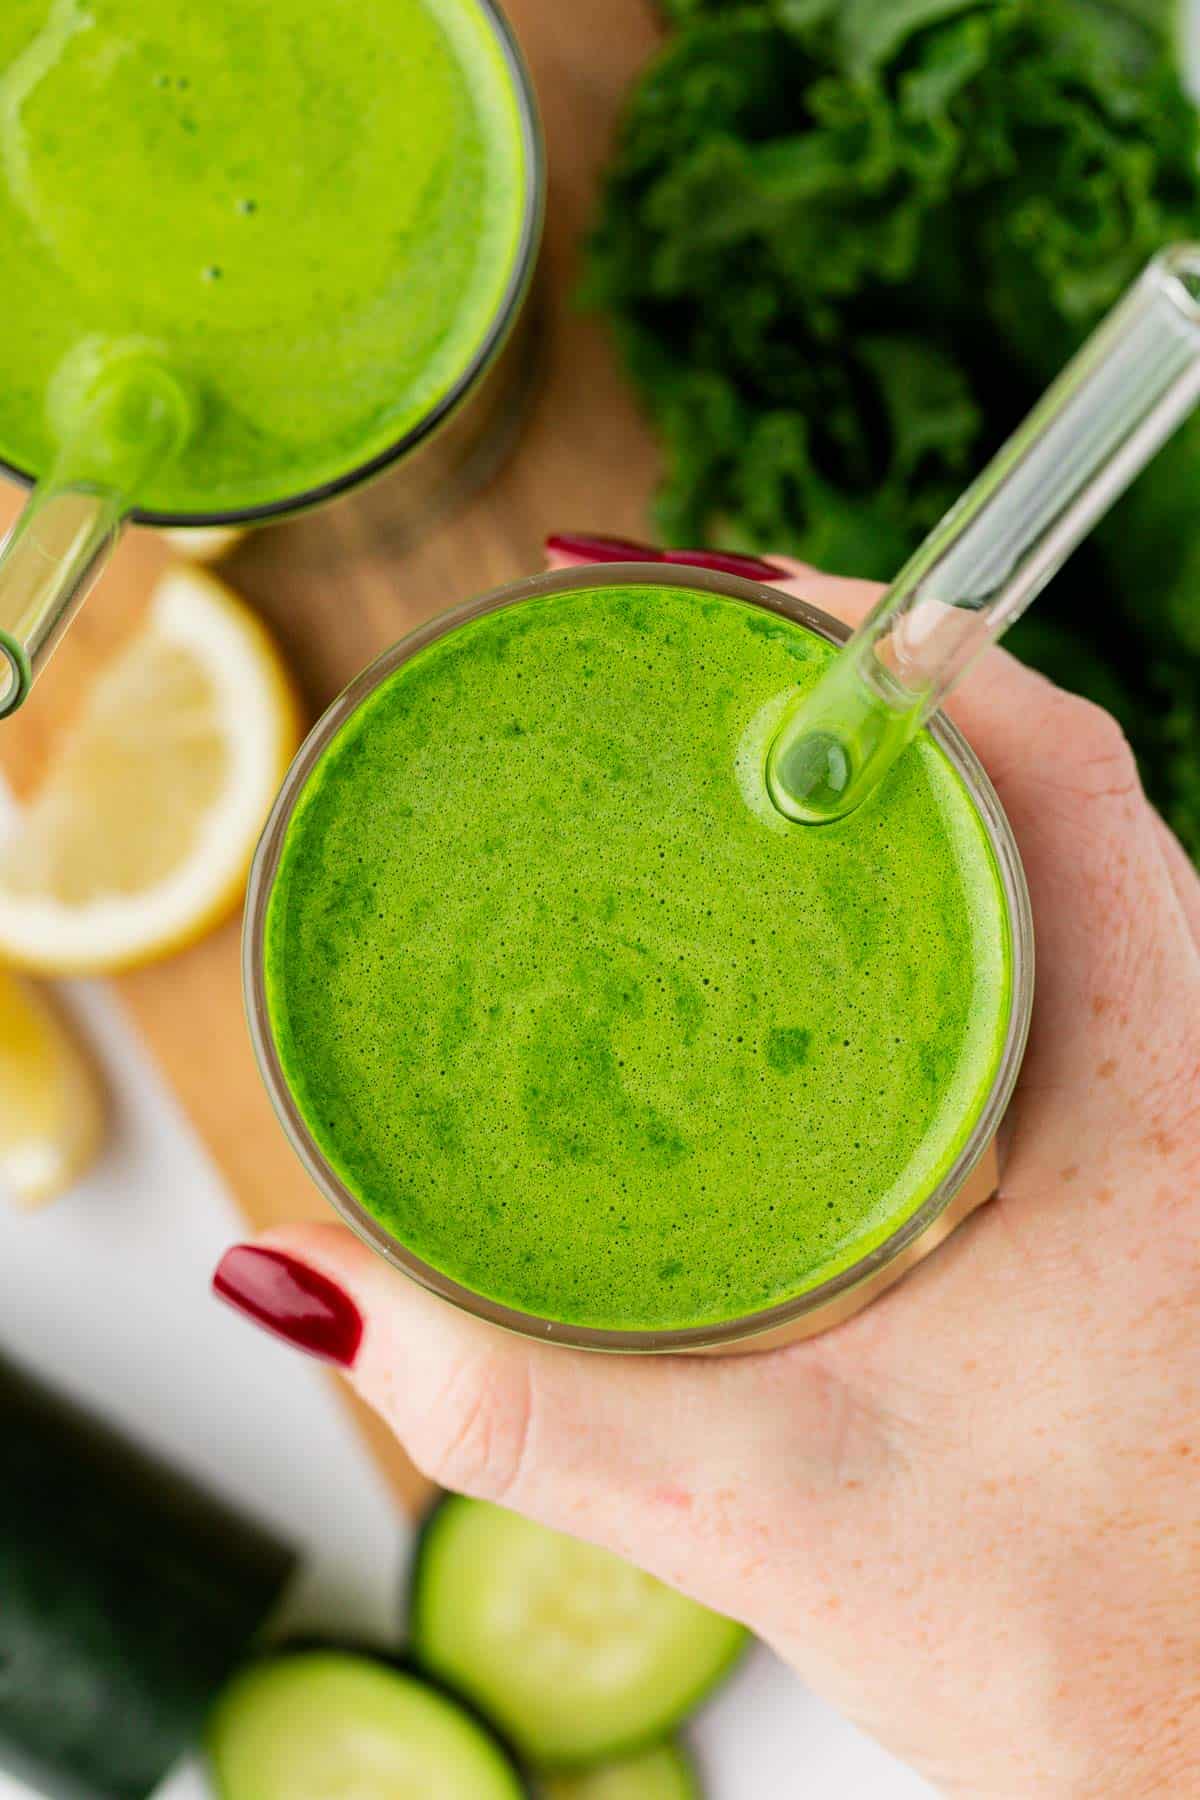 kale juice in a glass with a straw